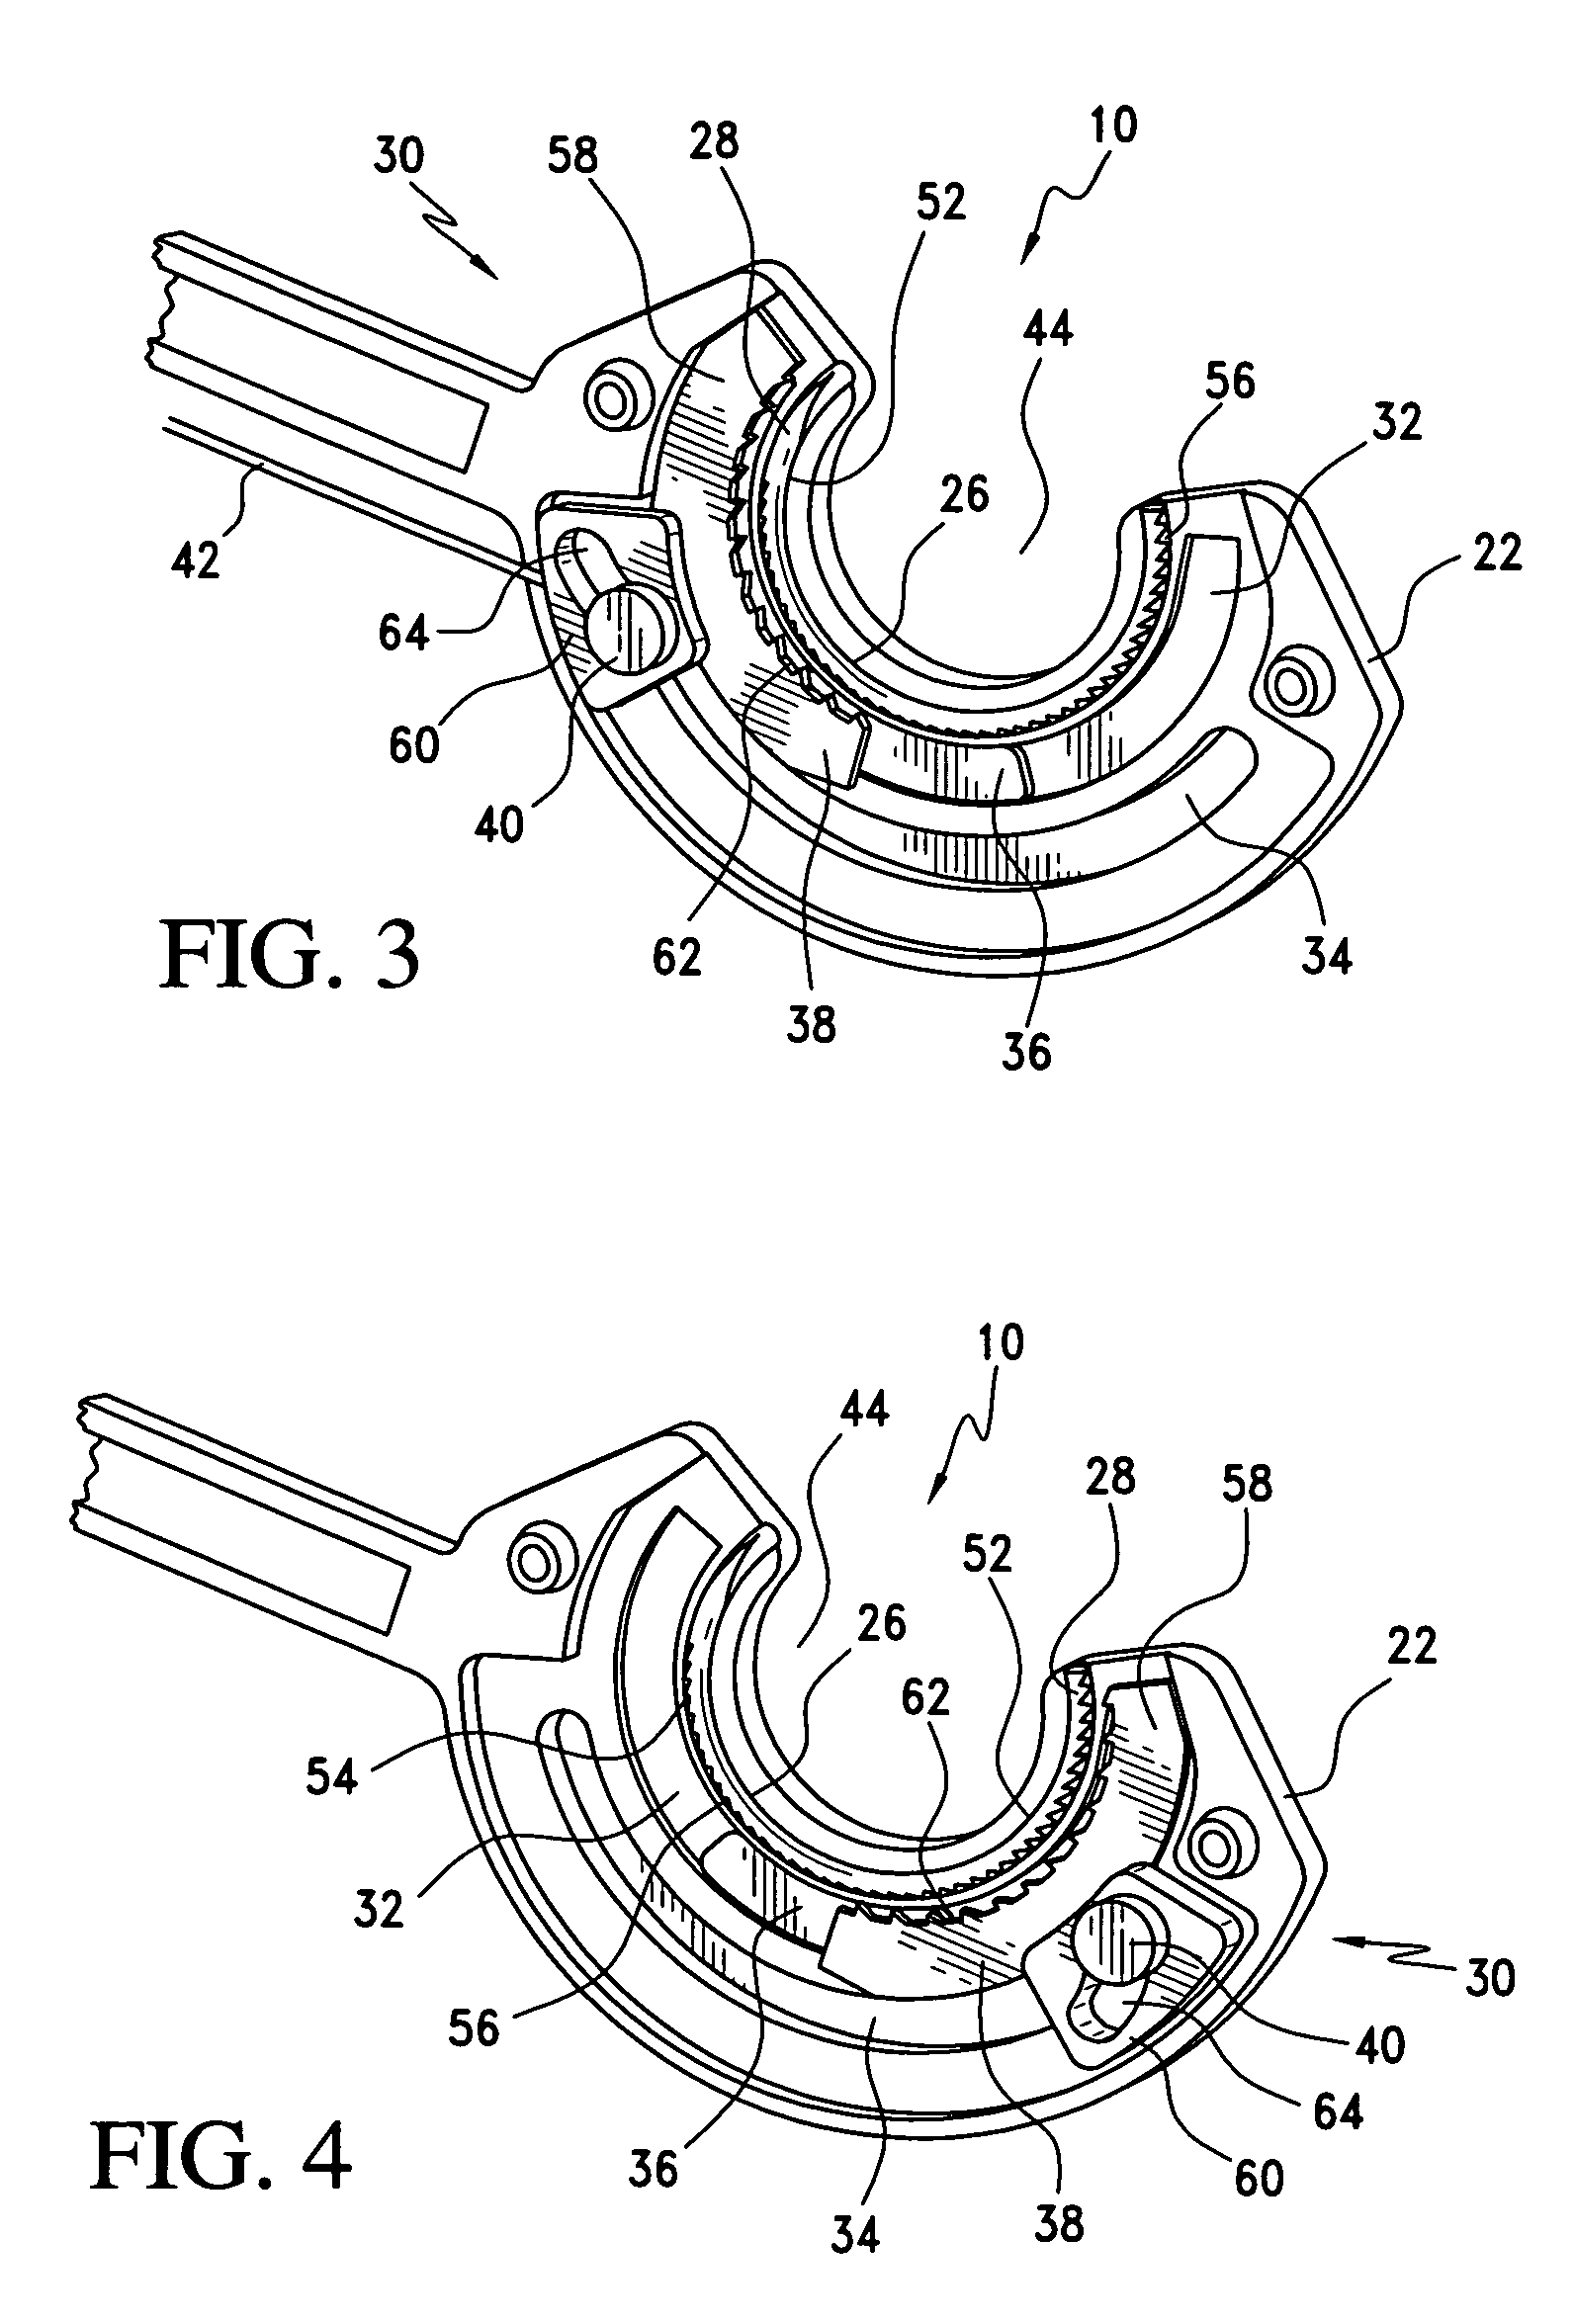 Surgical suturing apparatus with needle release system